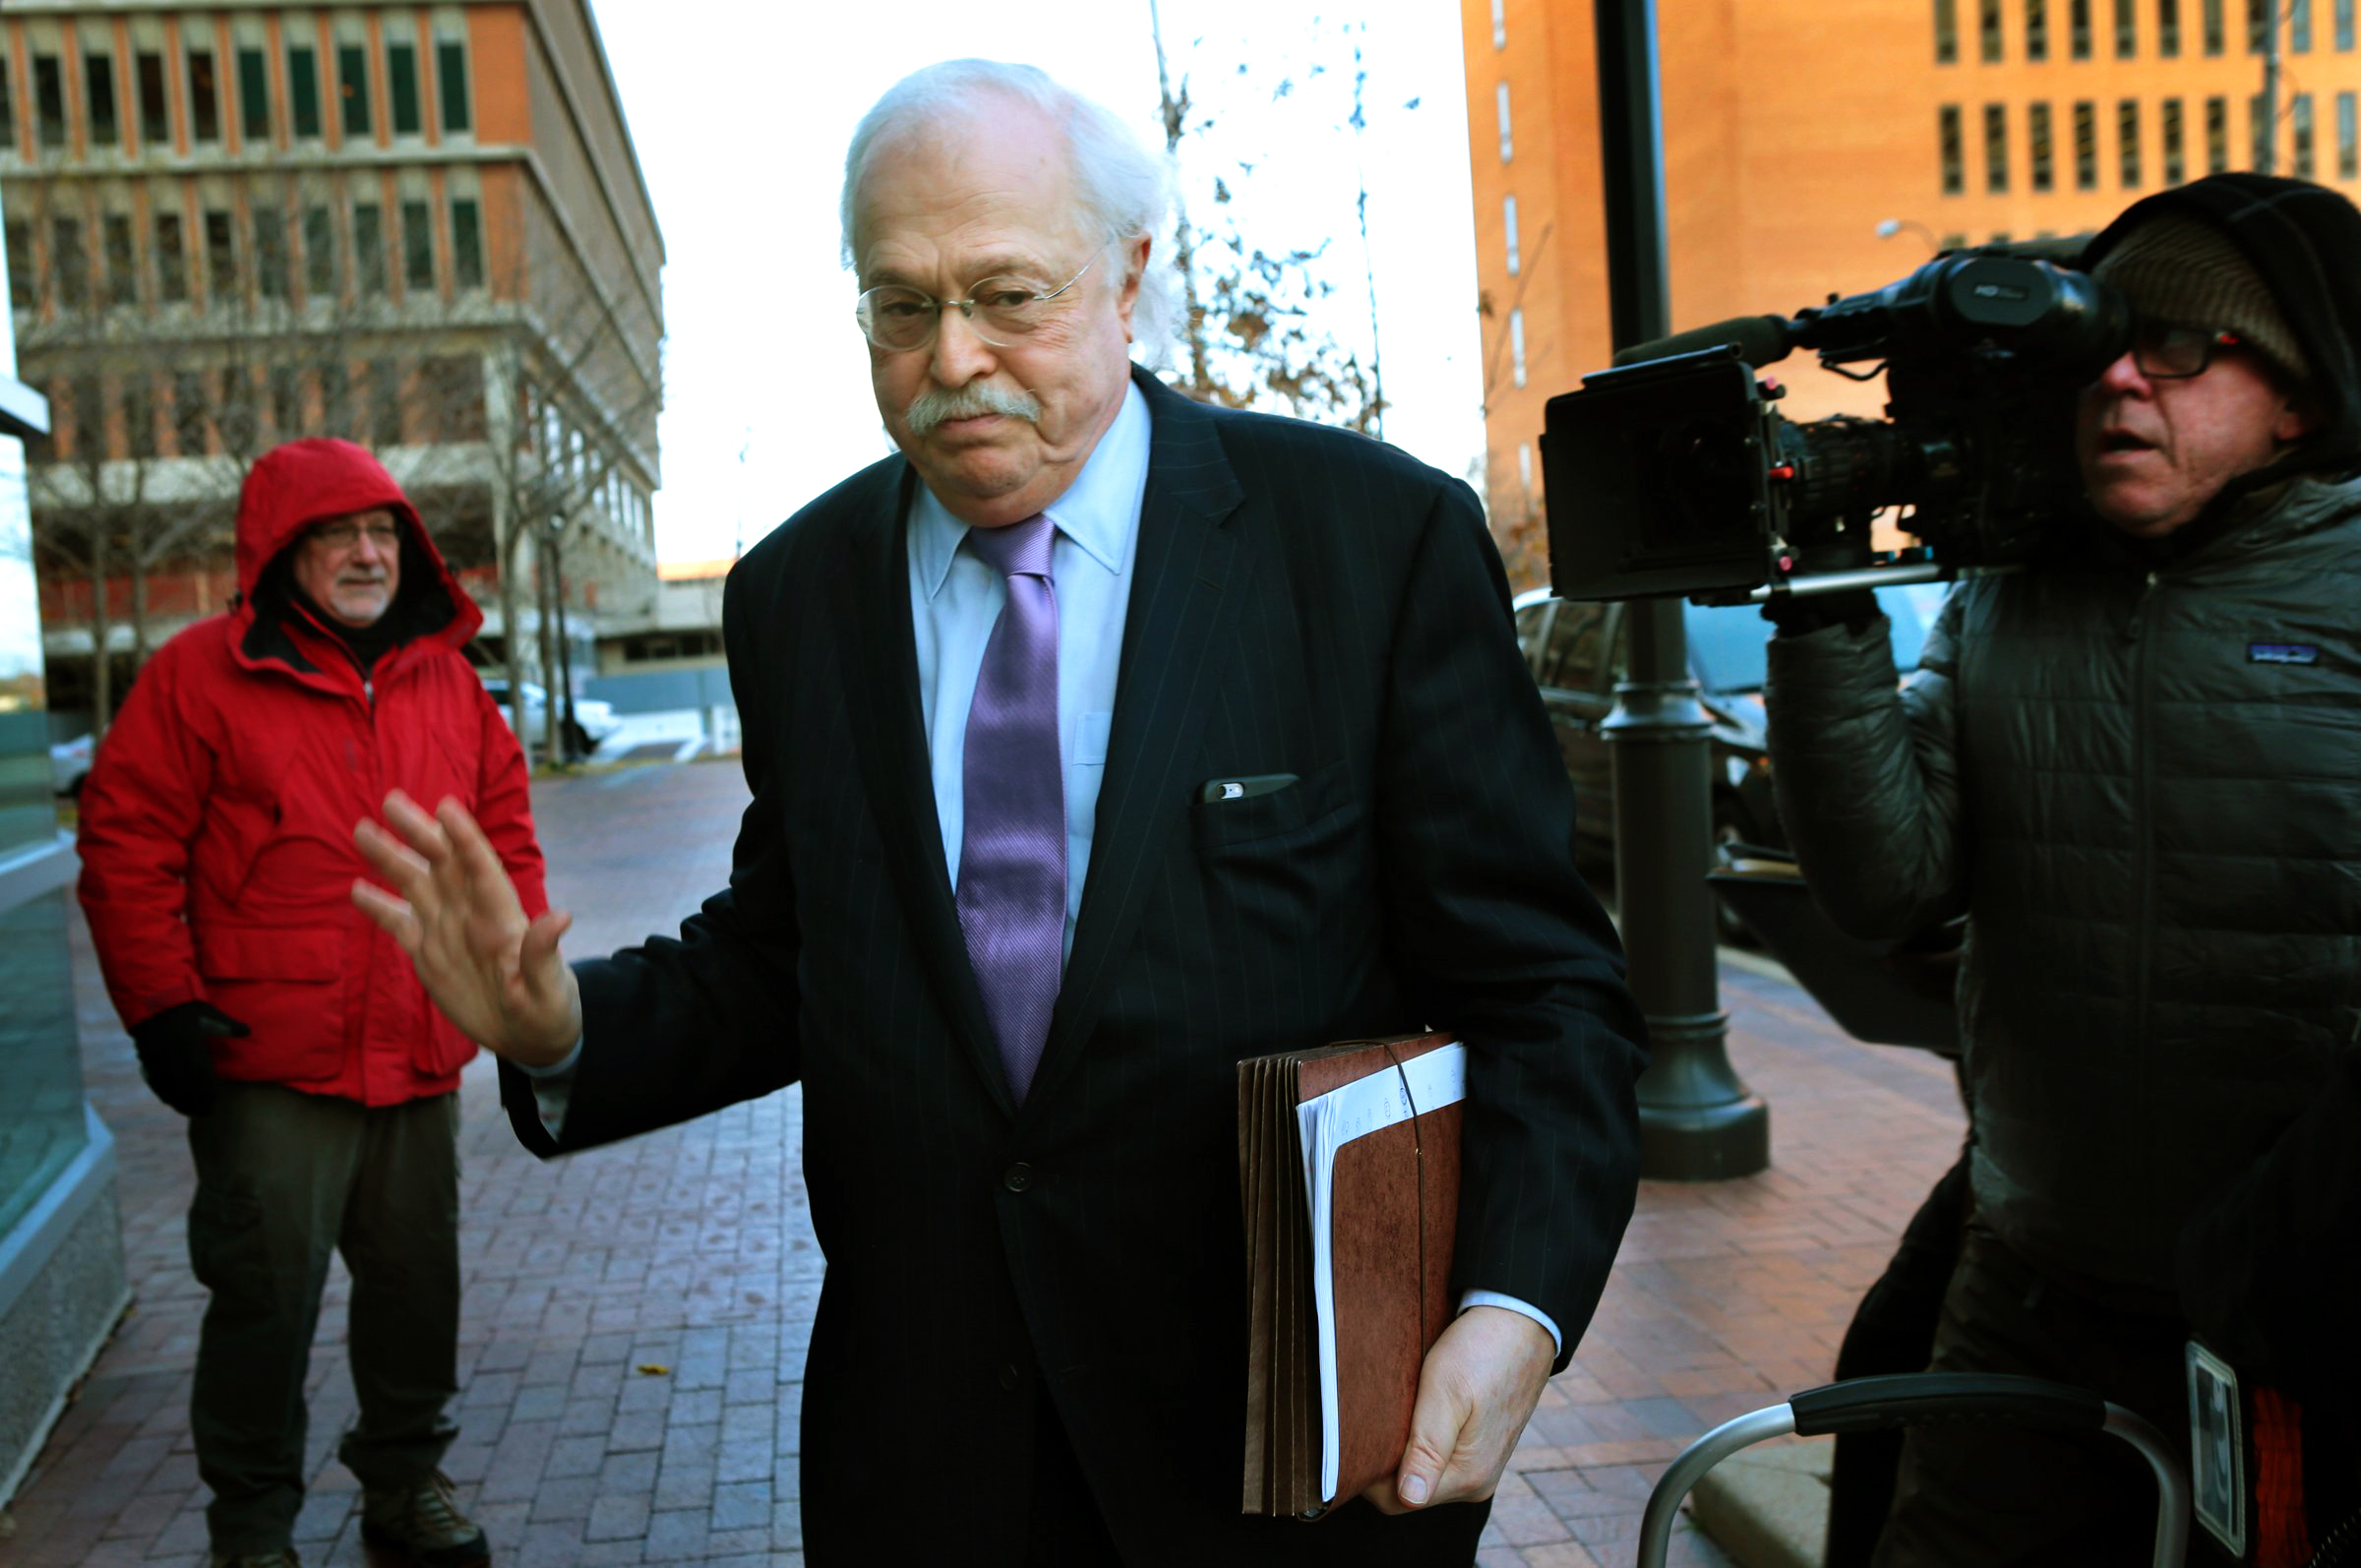 PHOTO: Pathologist Dr. Michael Baden waves off media questions as he arrives to testify before the grand jury concerning the Michael Brown shooting at the Buzz Westfall Justice Center in Clayton, Mo., on Nov. 13, 2014.